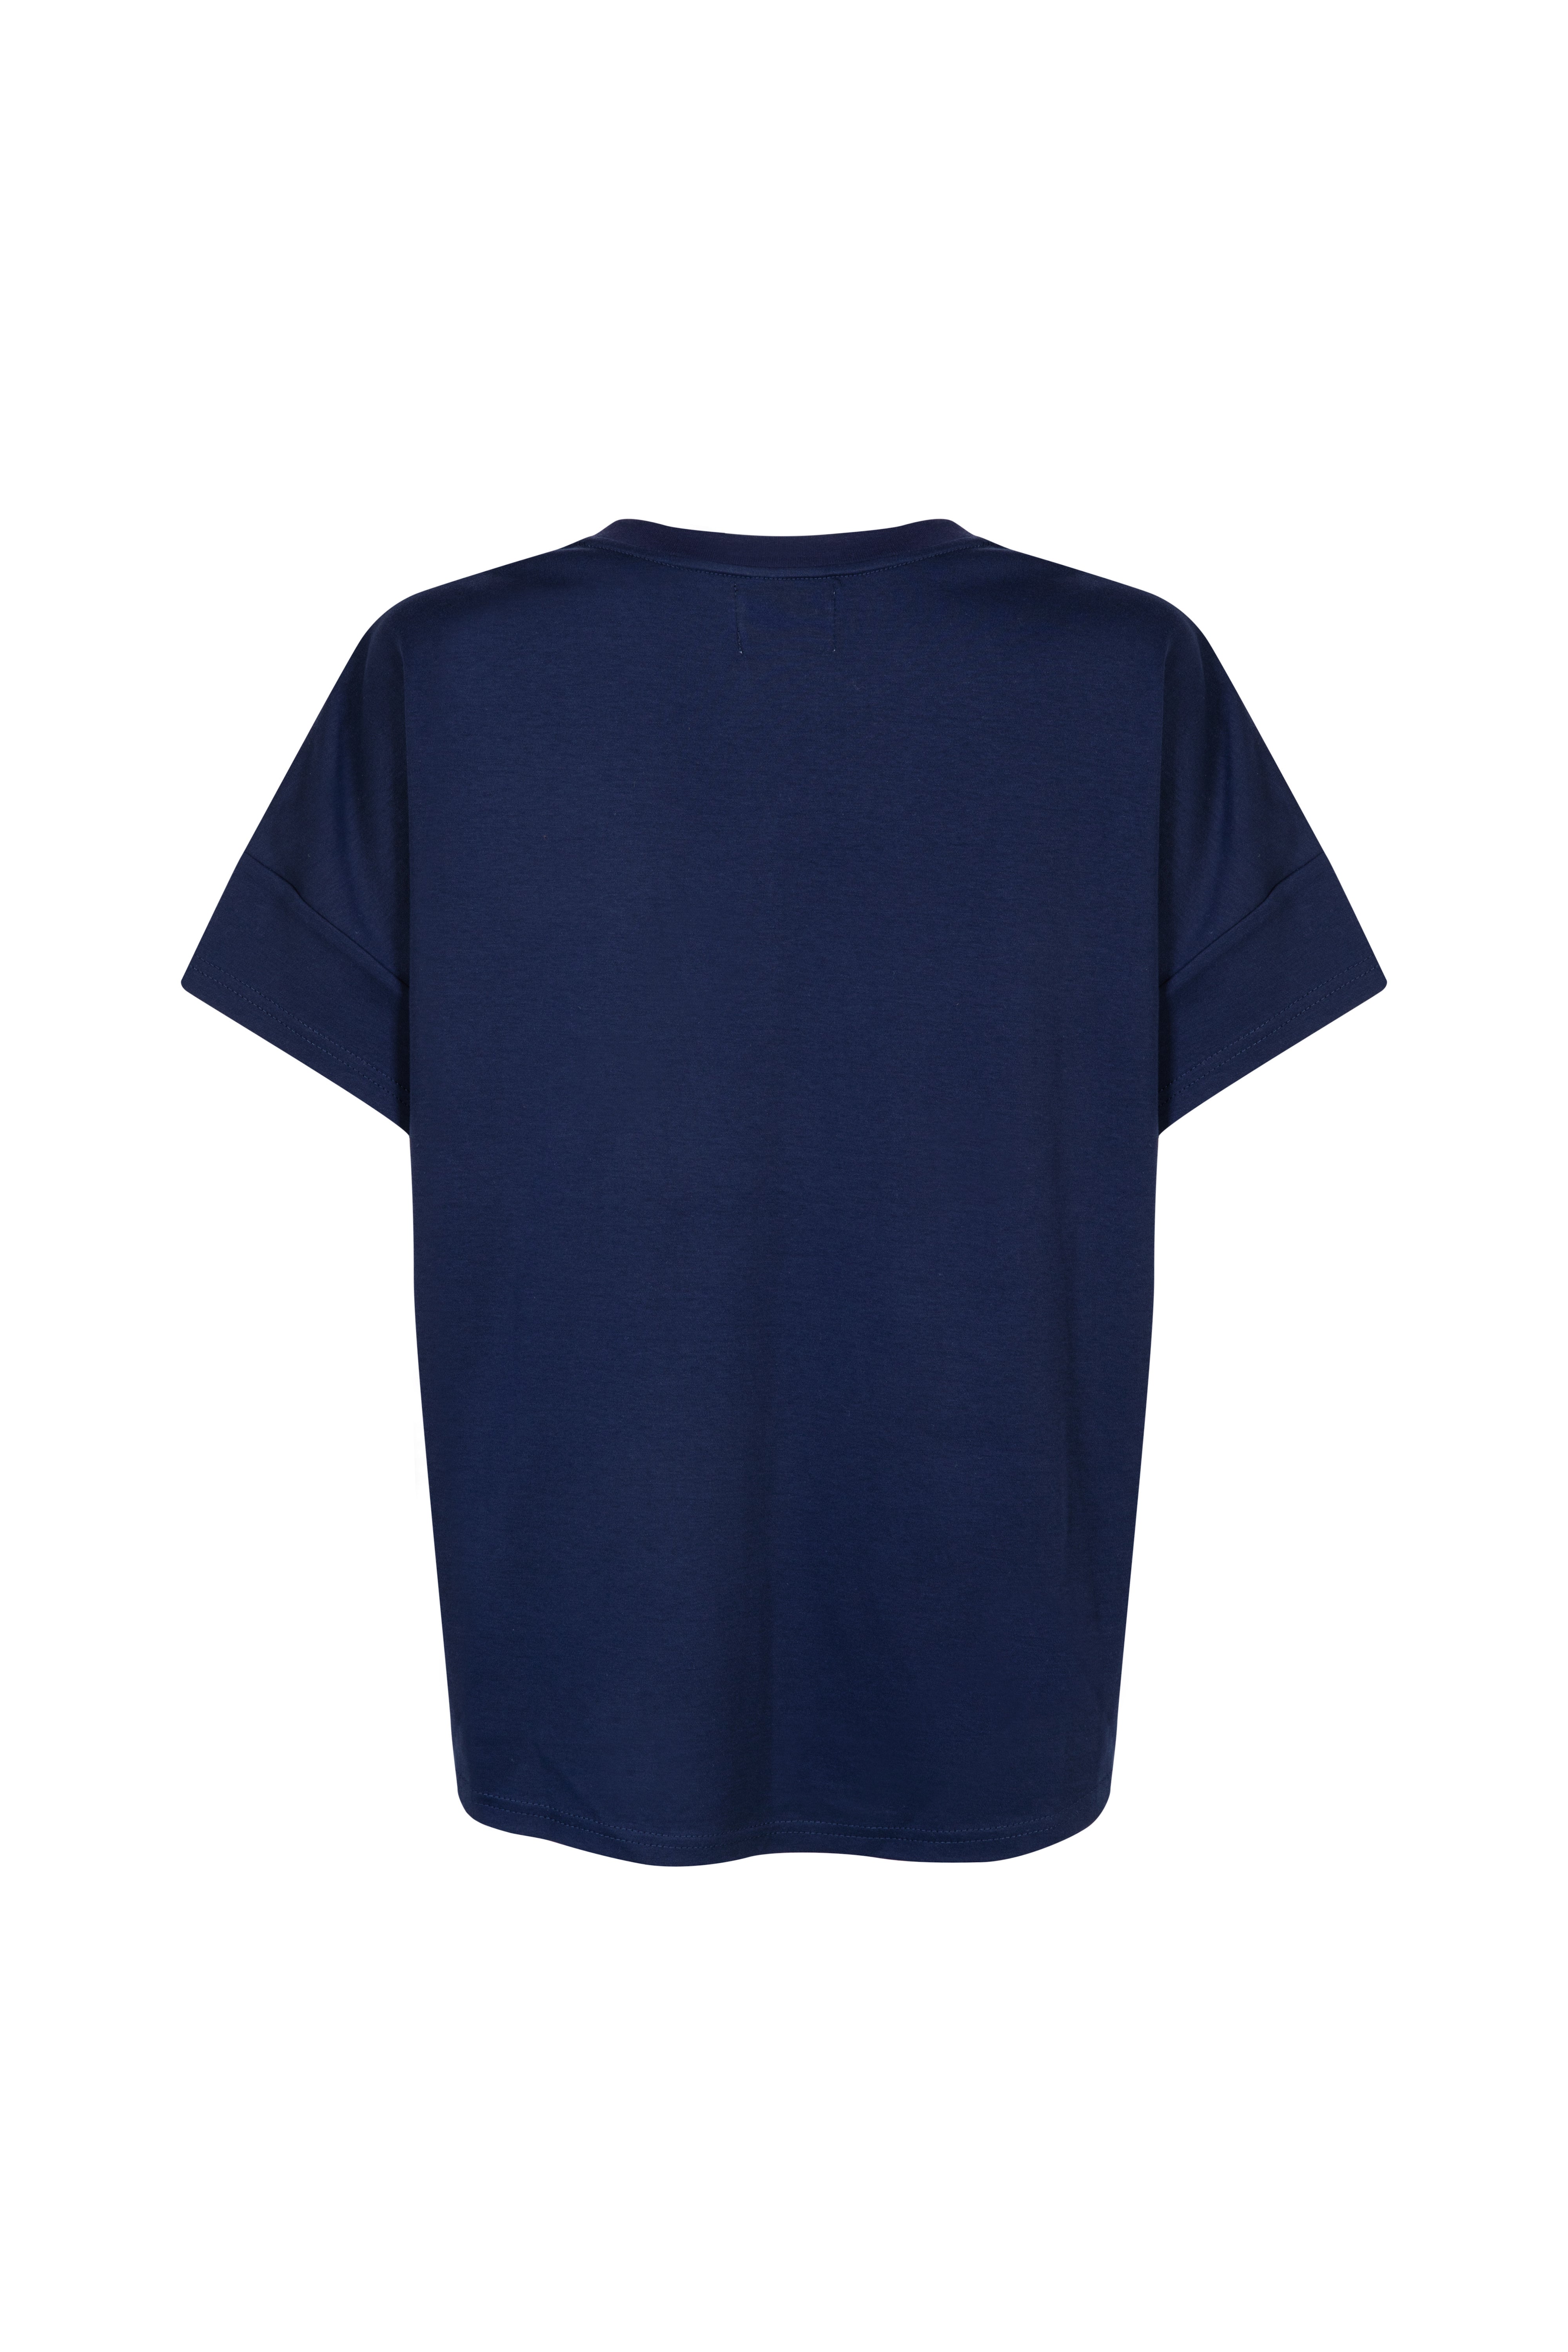 'SS' SIGNATURE EMBROIDERED T SHIRT - NAVY